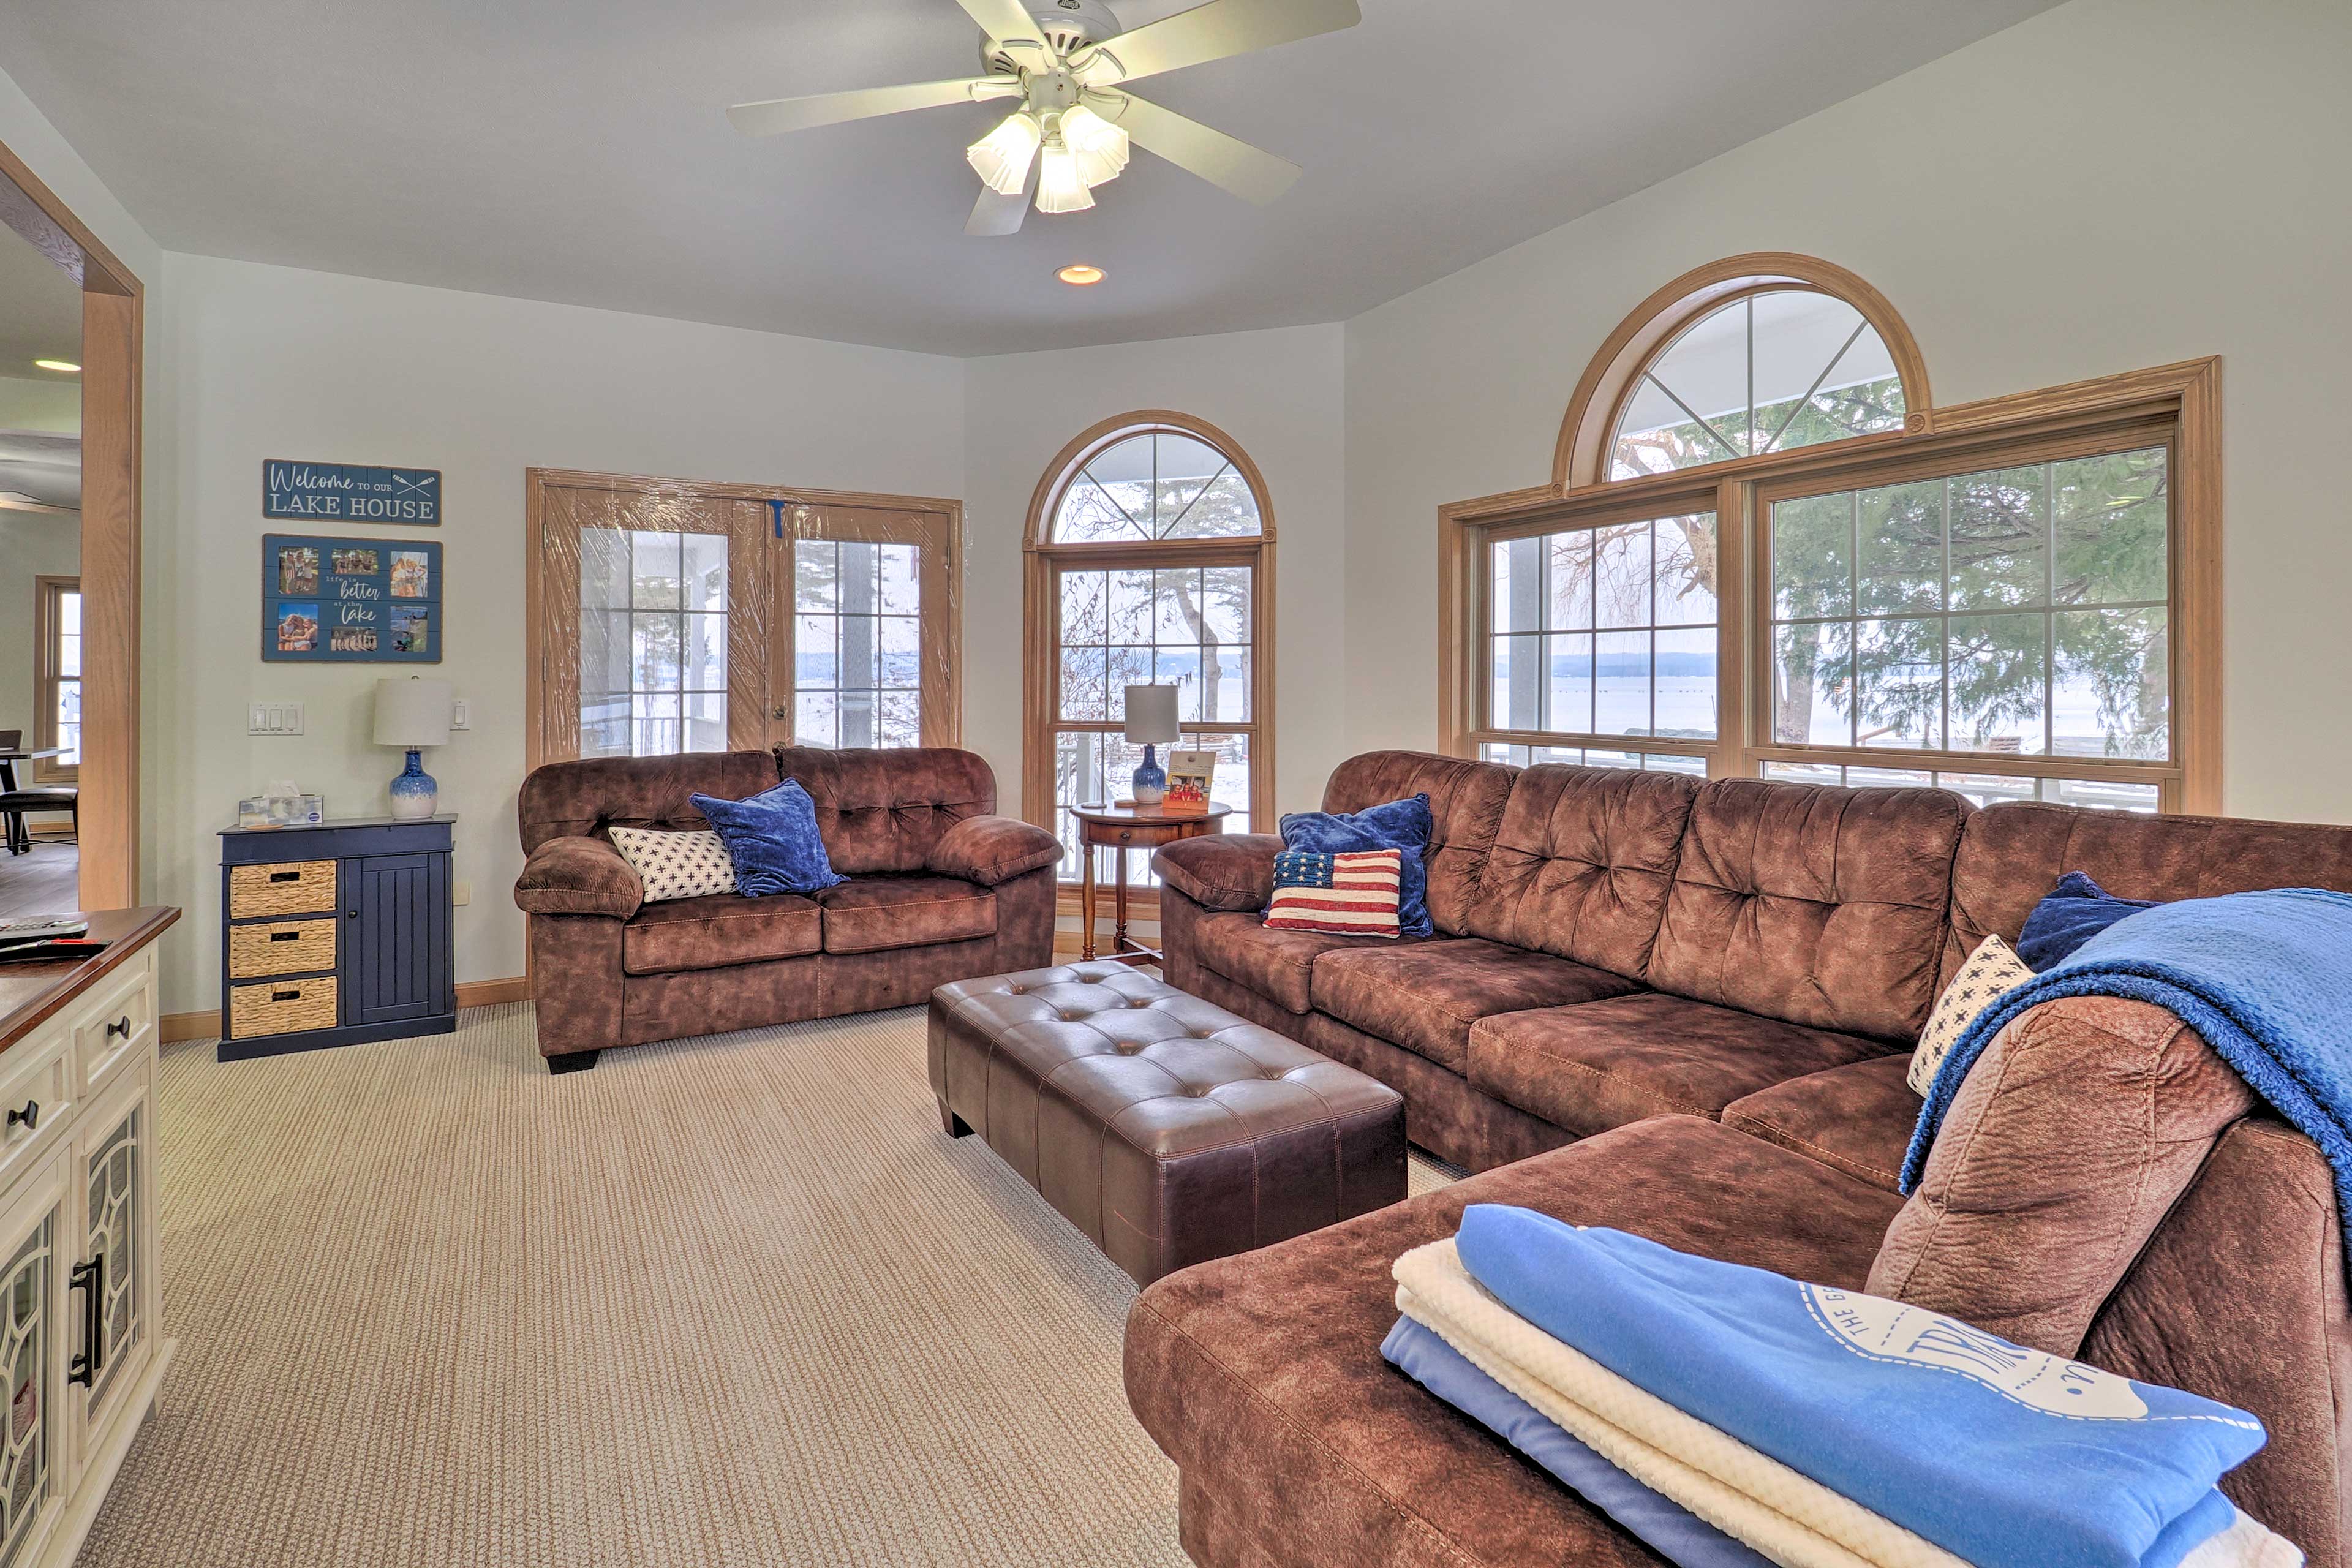 Traverse City Vacation Rental | 5BR | 3BA | Stairs Required | 3,500 Sq Ft